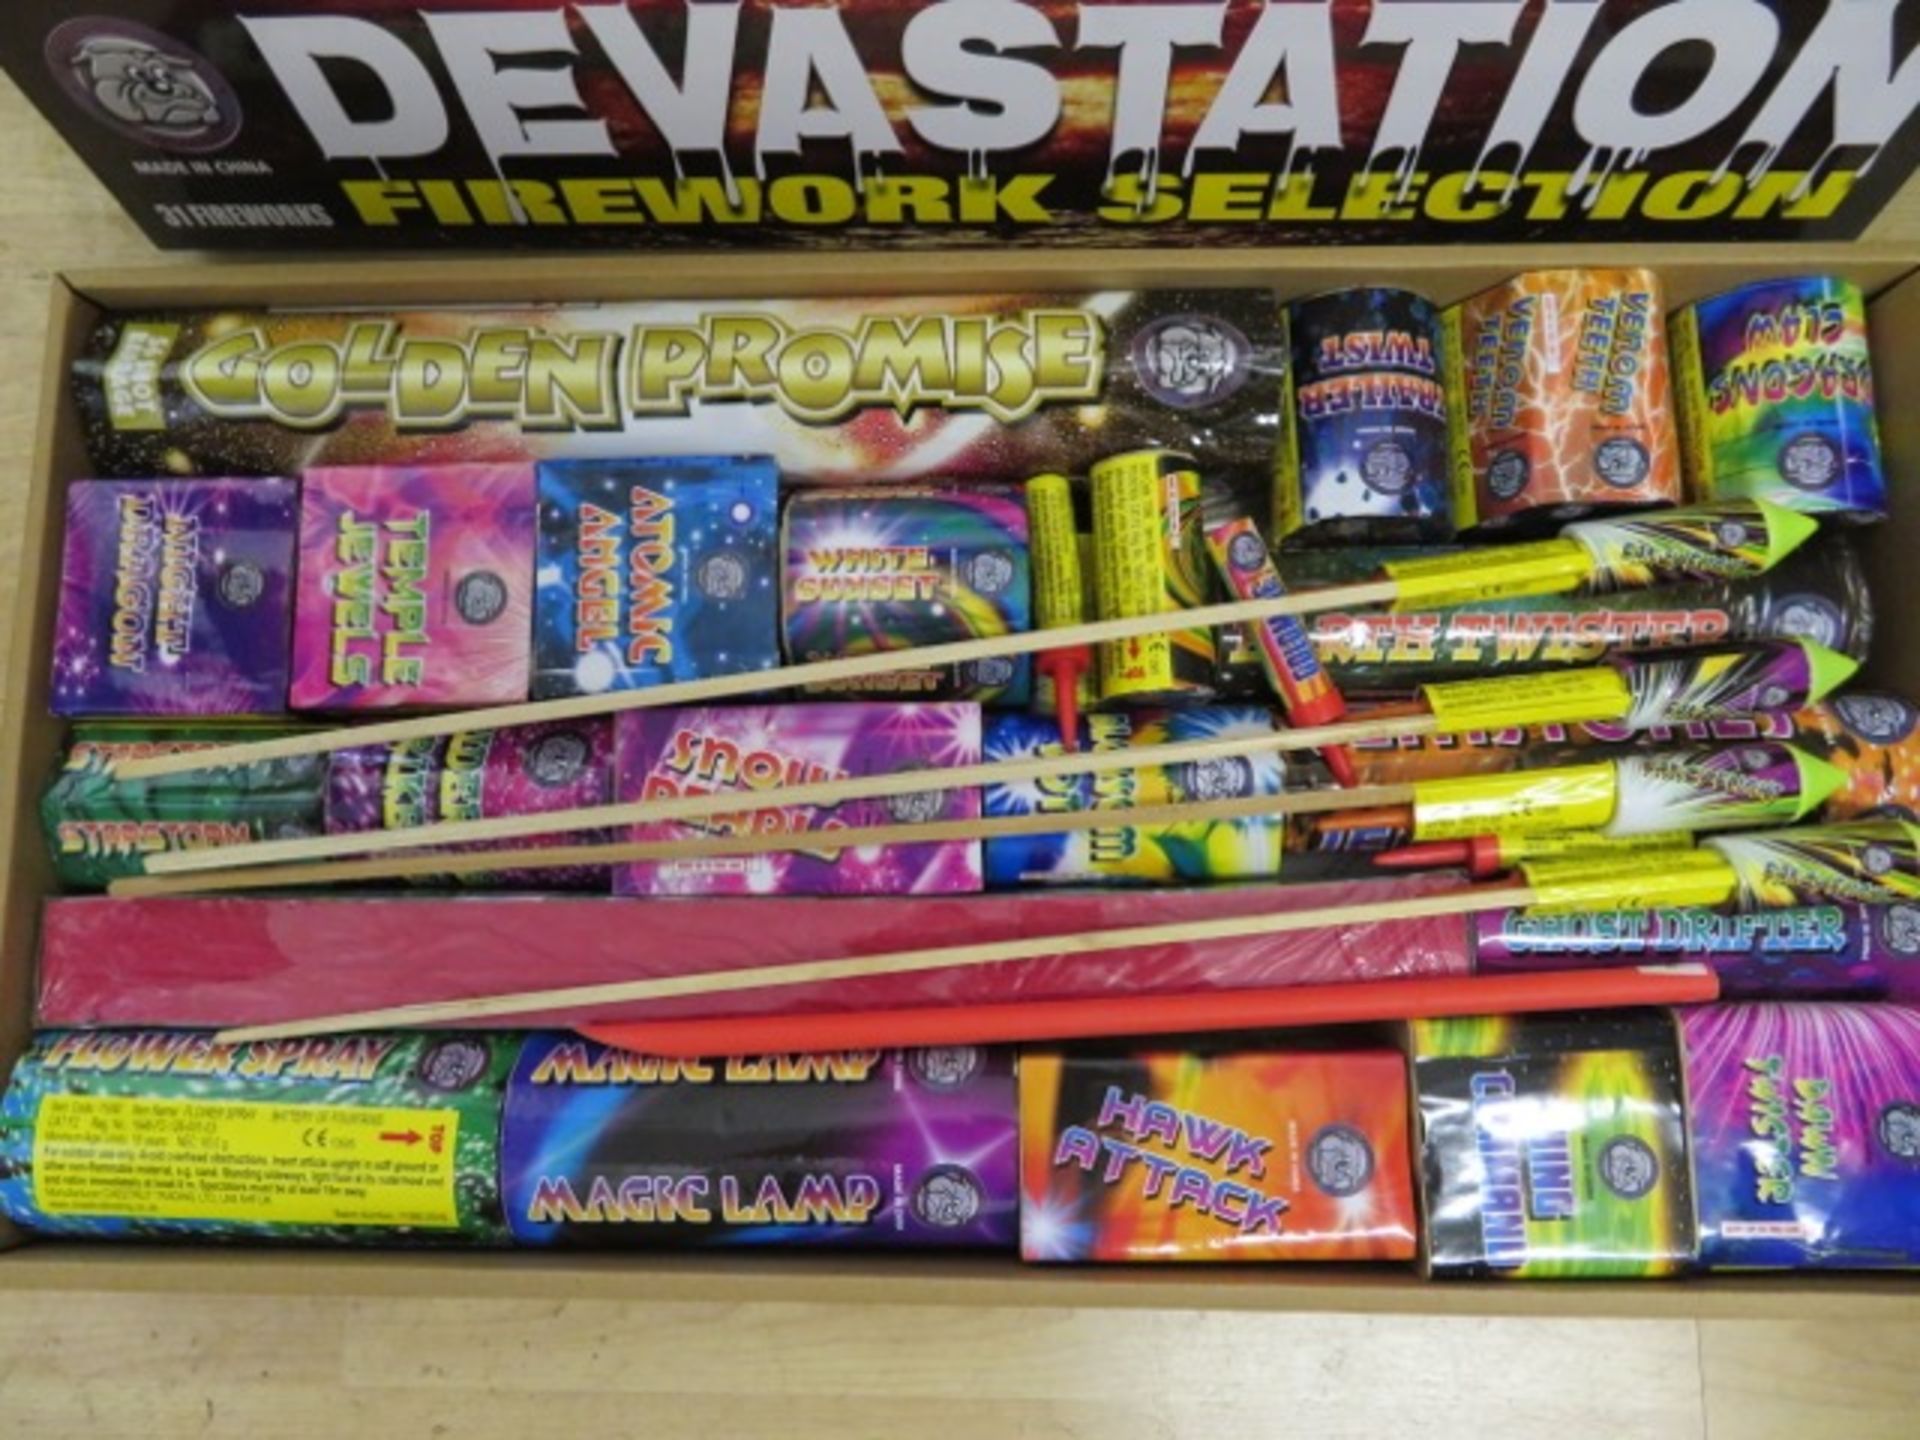 31 PIECE DEVASTATION FIREWORK SELECTION BOX. RRP £199.99. Includes: 300 Shot Repeater, Golden - Image 2 of 5